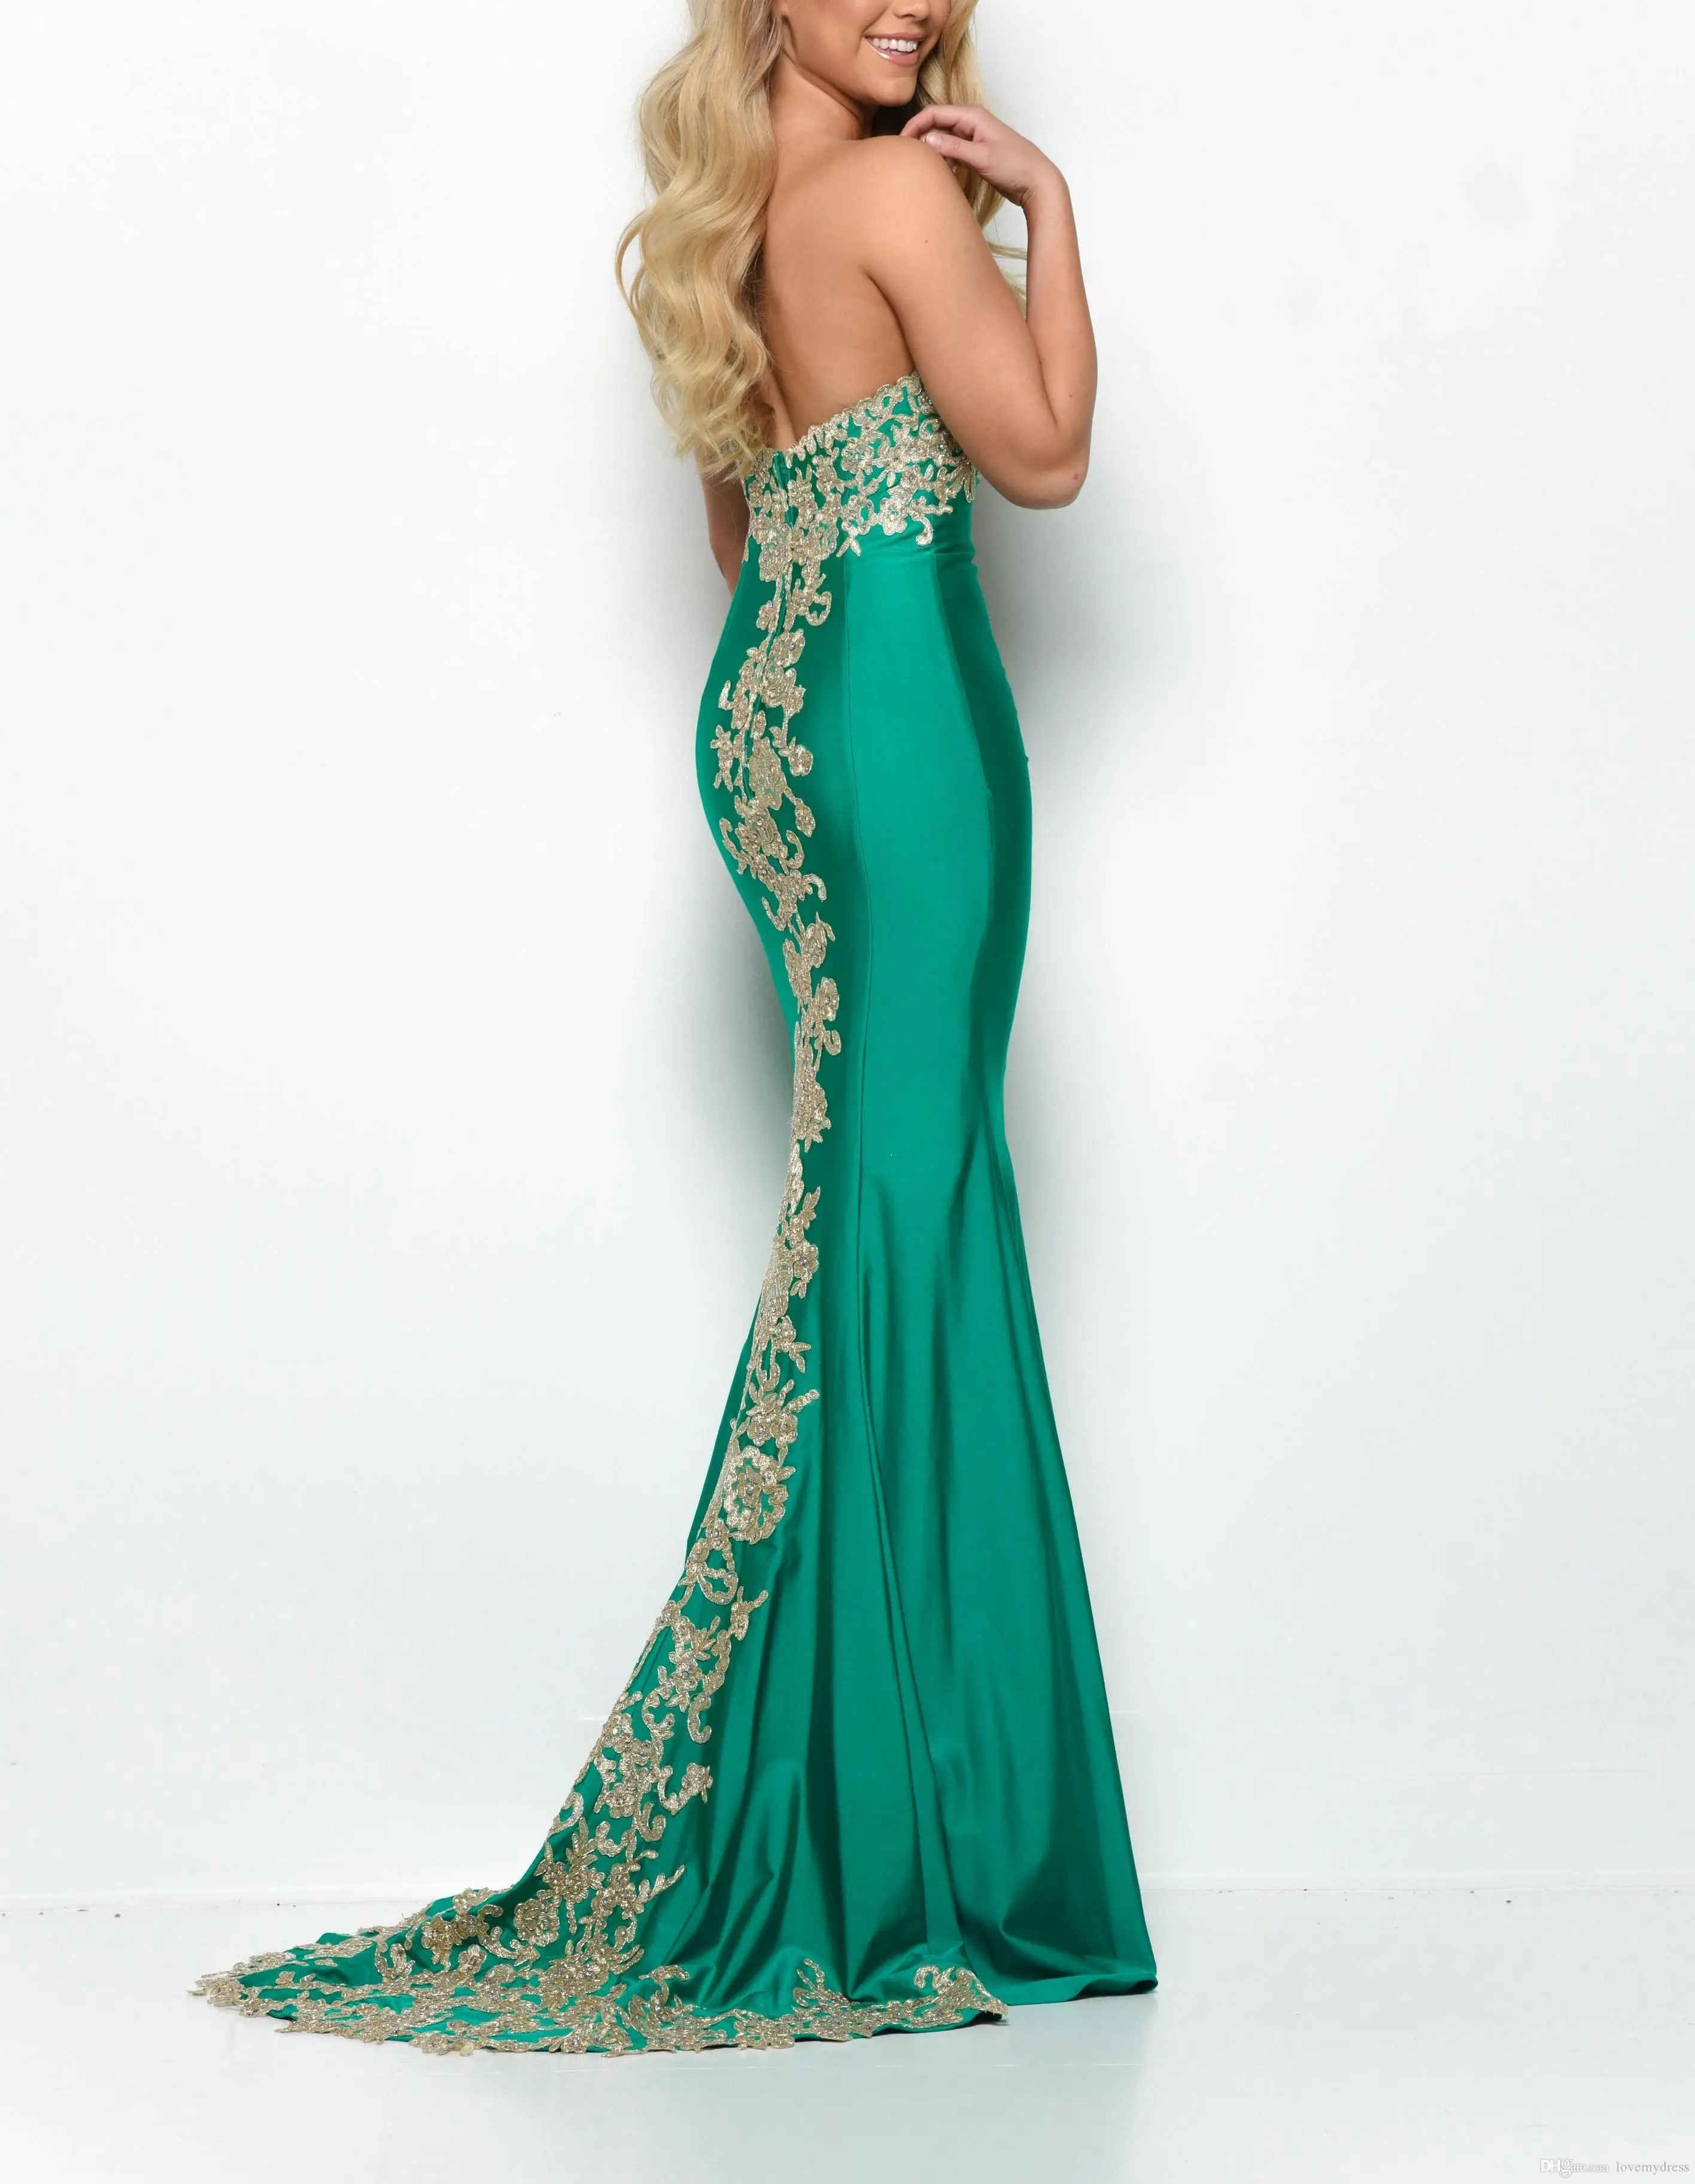 Green Gold Lace Strapless Dresses Evening Wear 2020 Trumpet Mermaid Prom Dress Elegant Formal Dress Special Occasion Gowns